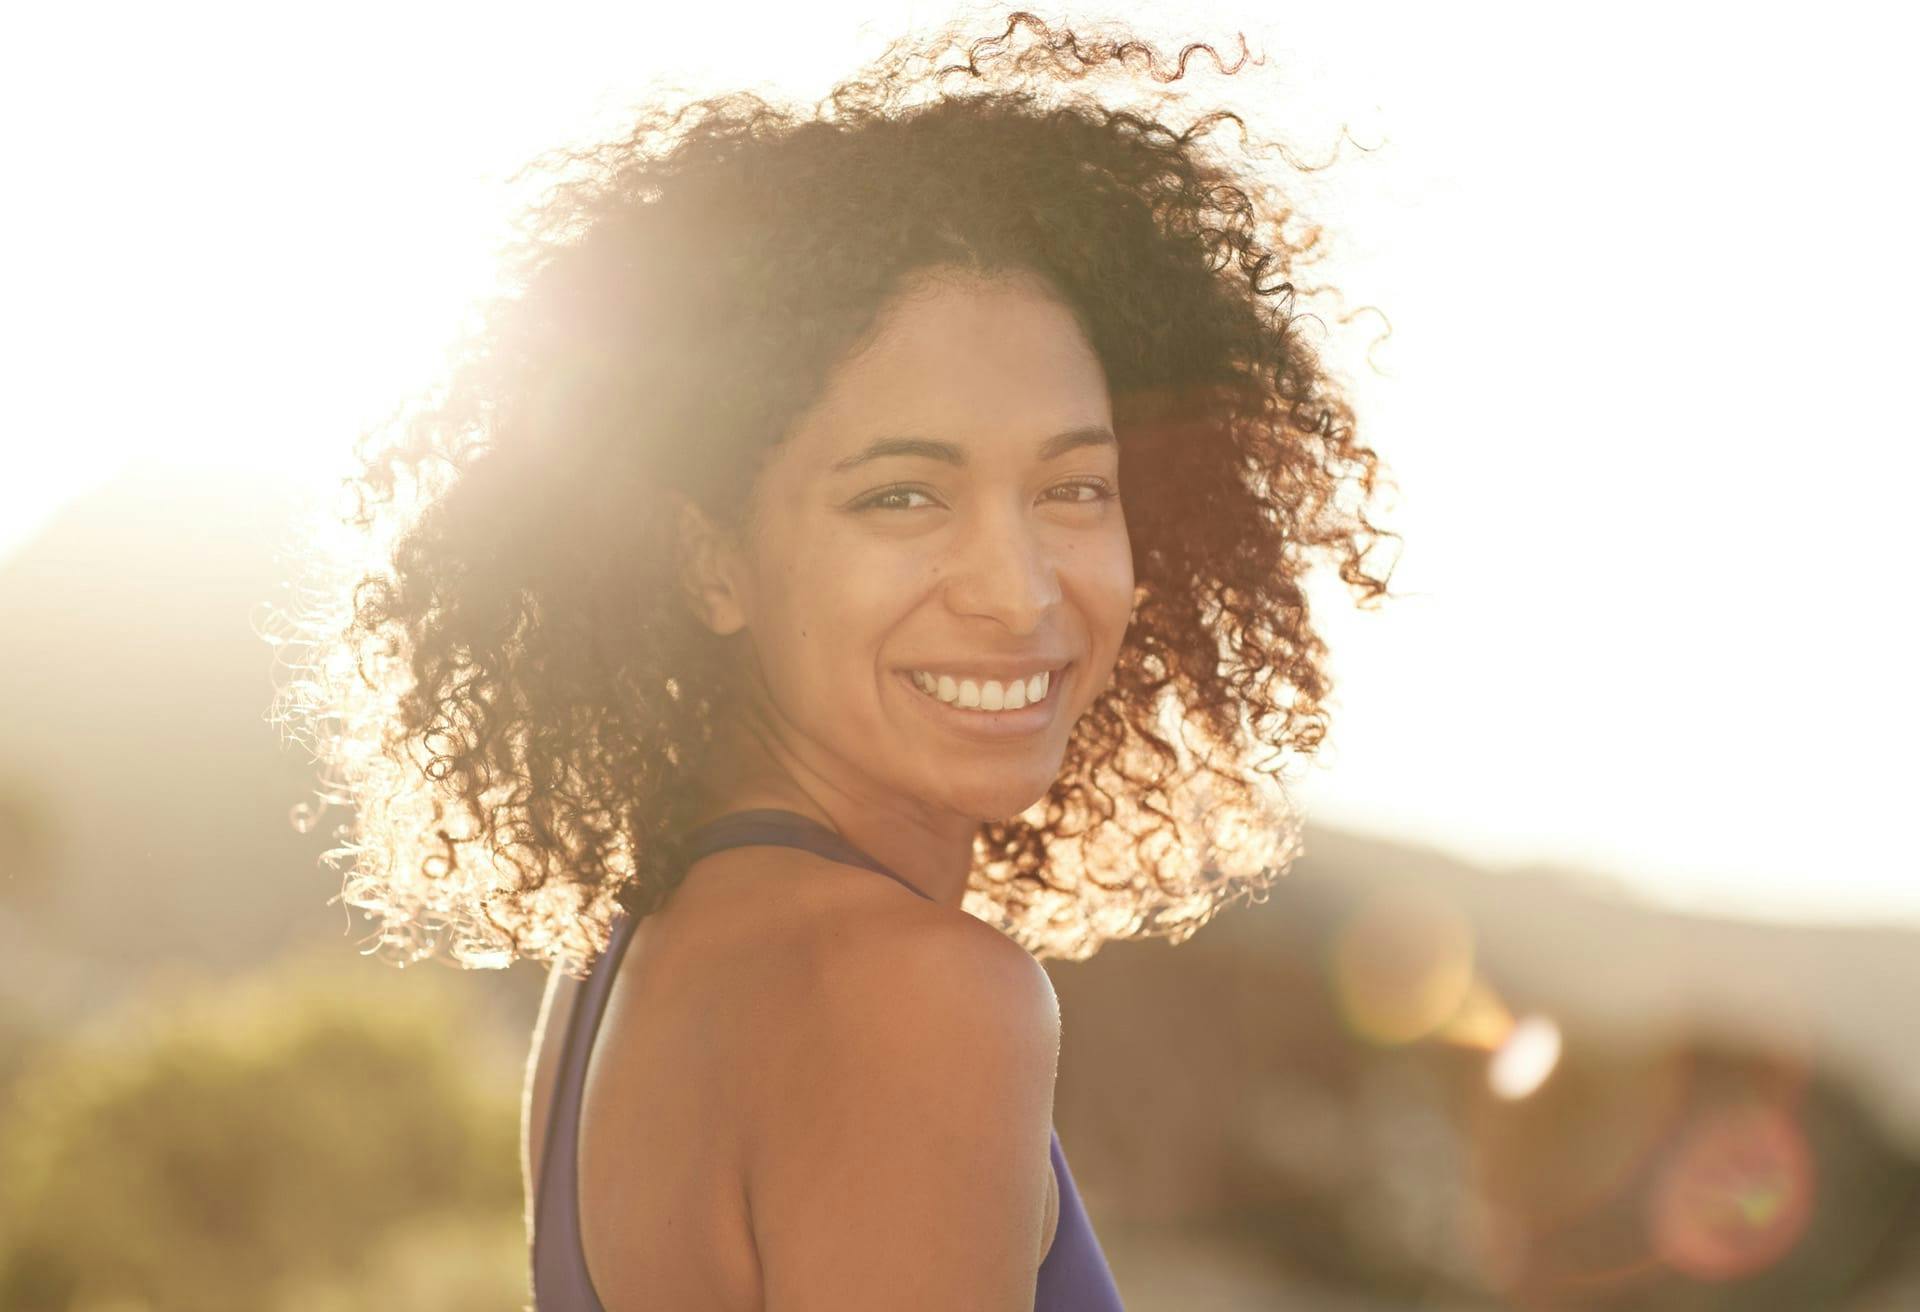 Woman with dark curly hair smiling